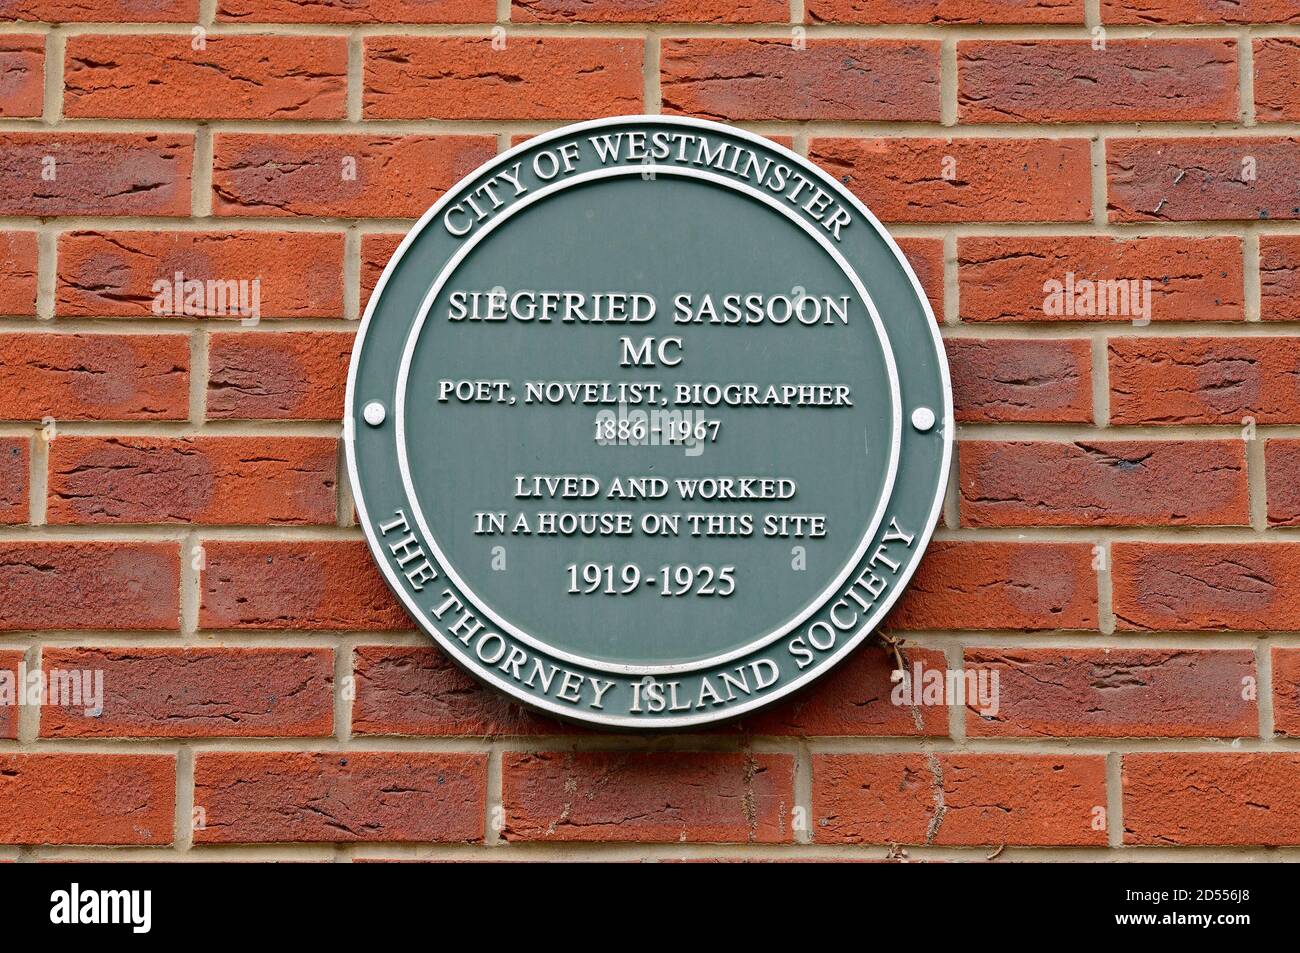 London, England, UK. Commemorative Green Plaque: Siegfried Sassoon MC, Poet, novelist, biographer (1886-1967) lived and worked in a house on this site Stock Photo